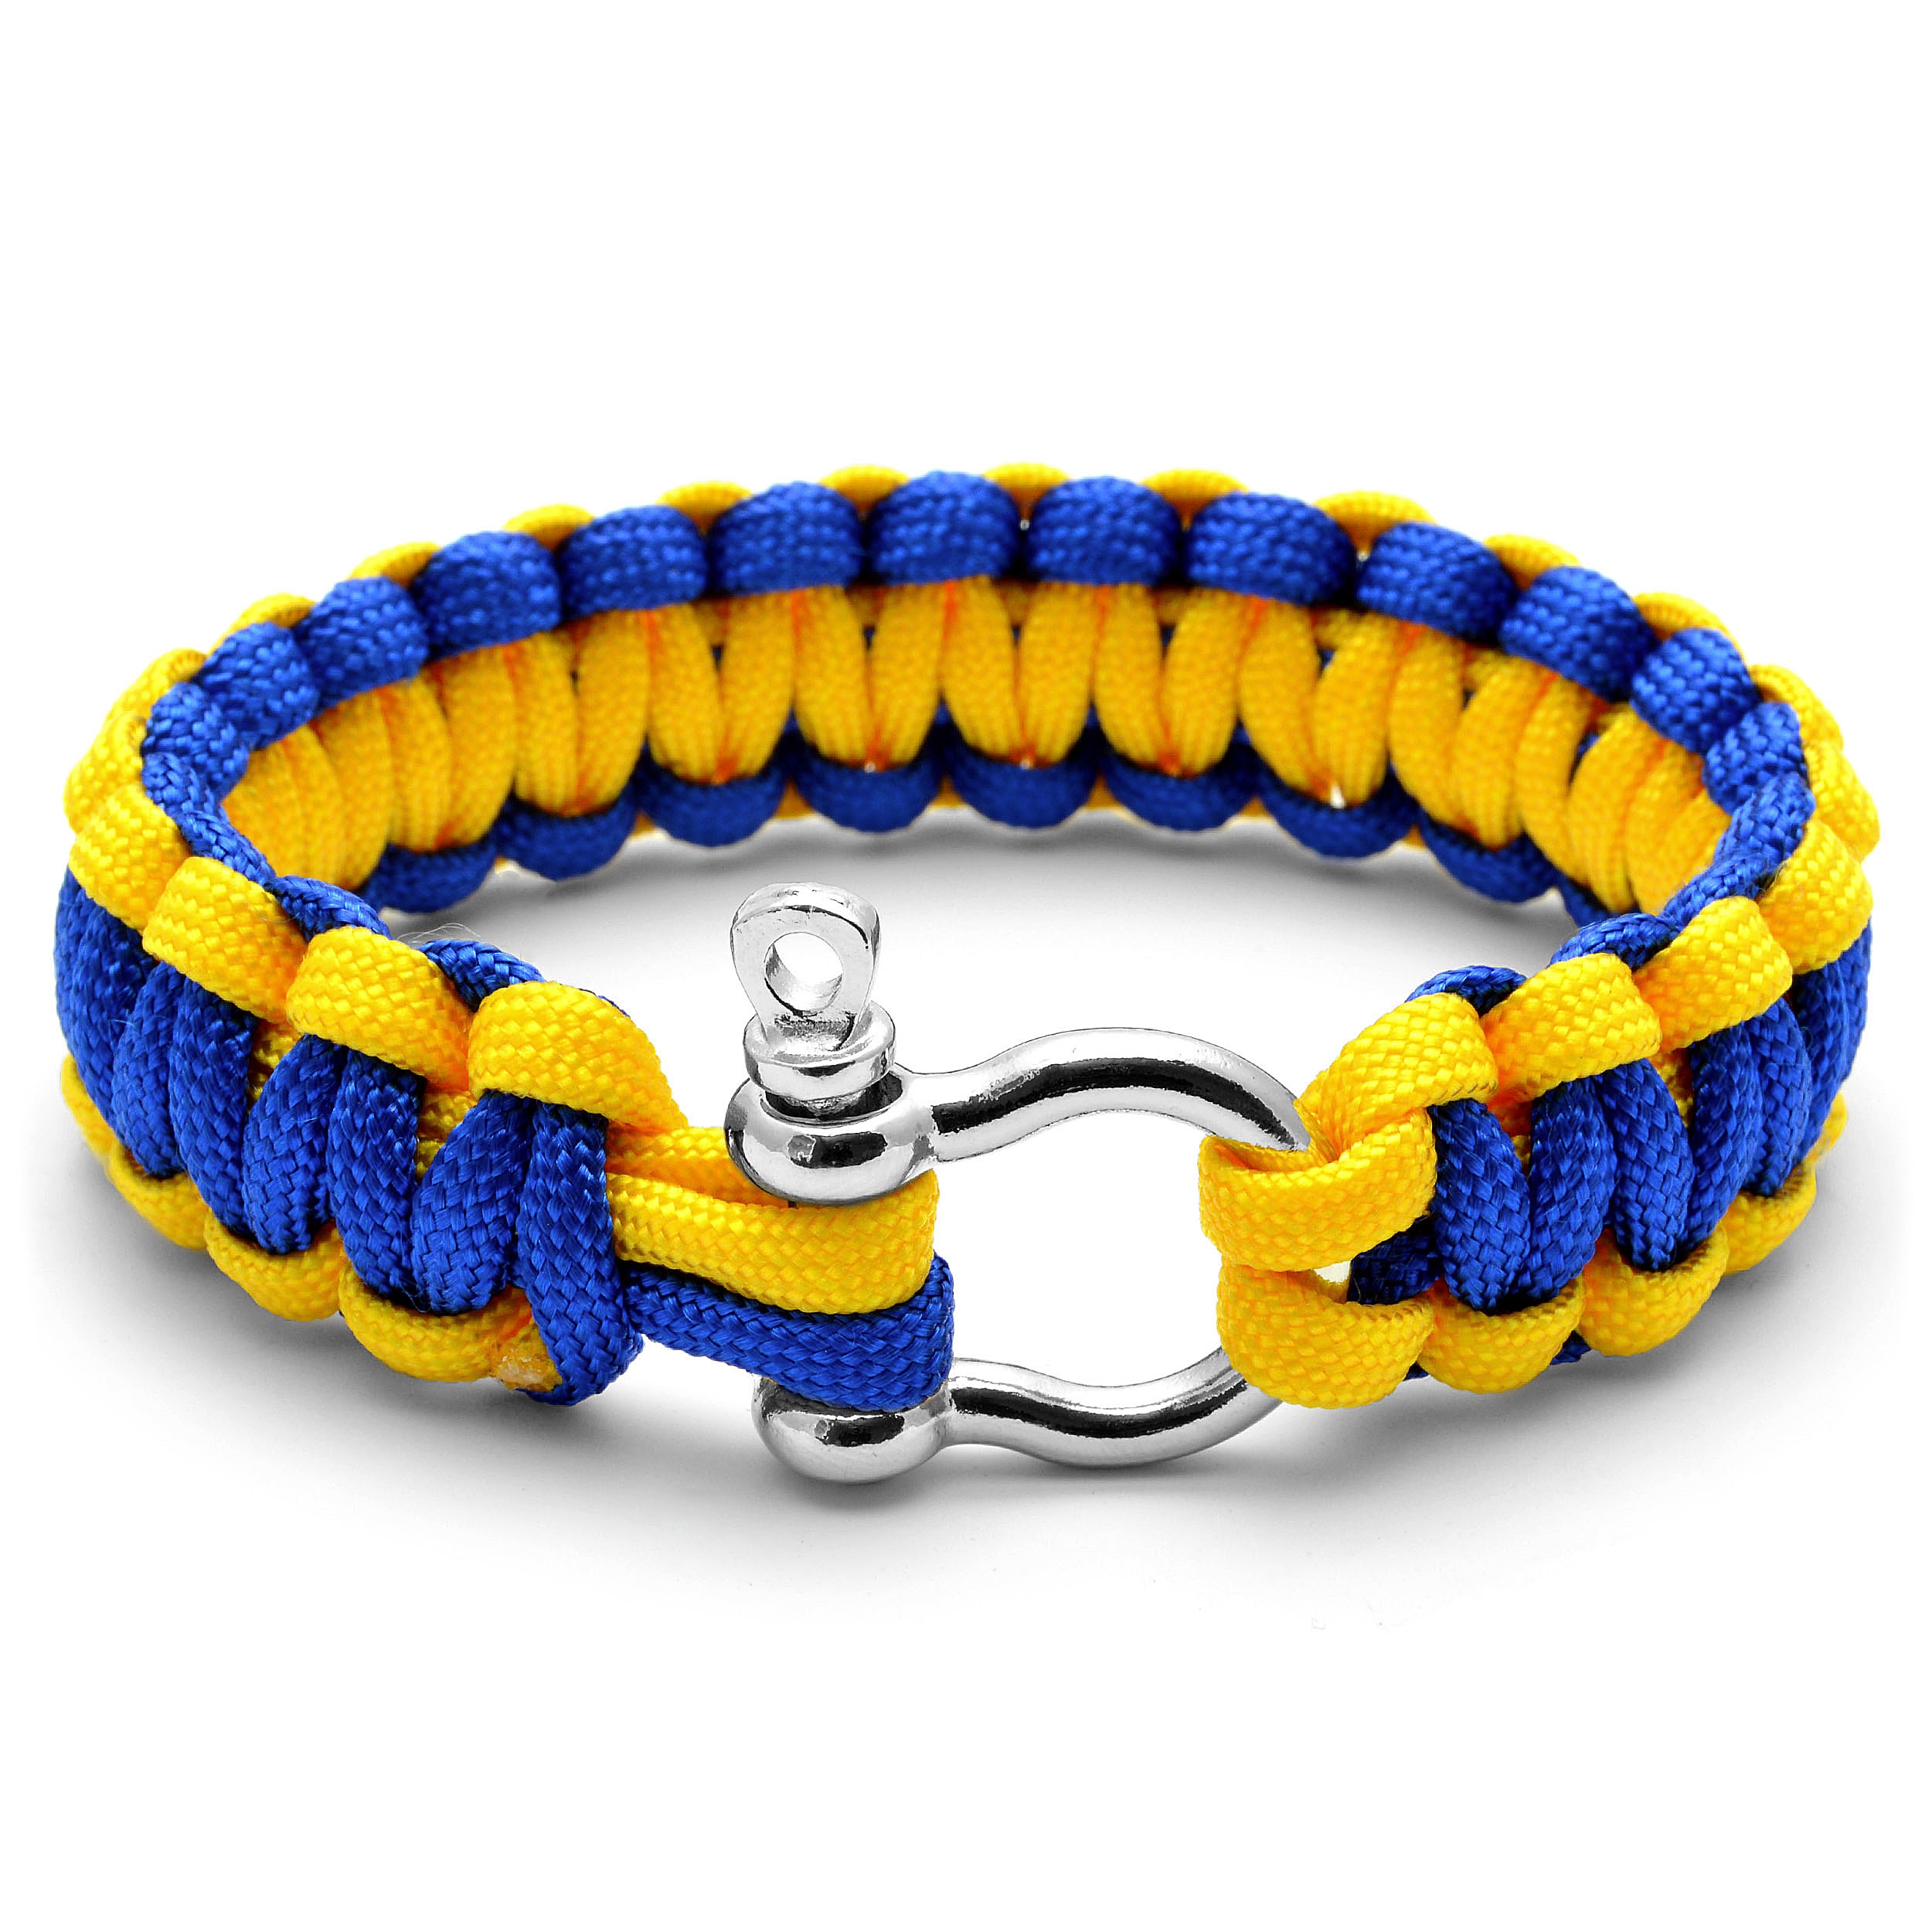 Blue & Yellow Paracord Bracelet, In stock!